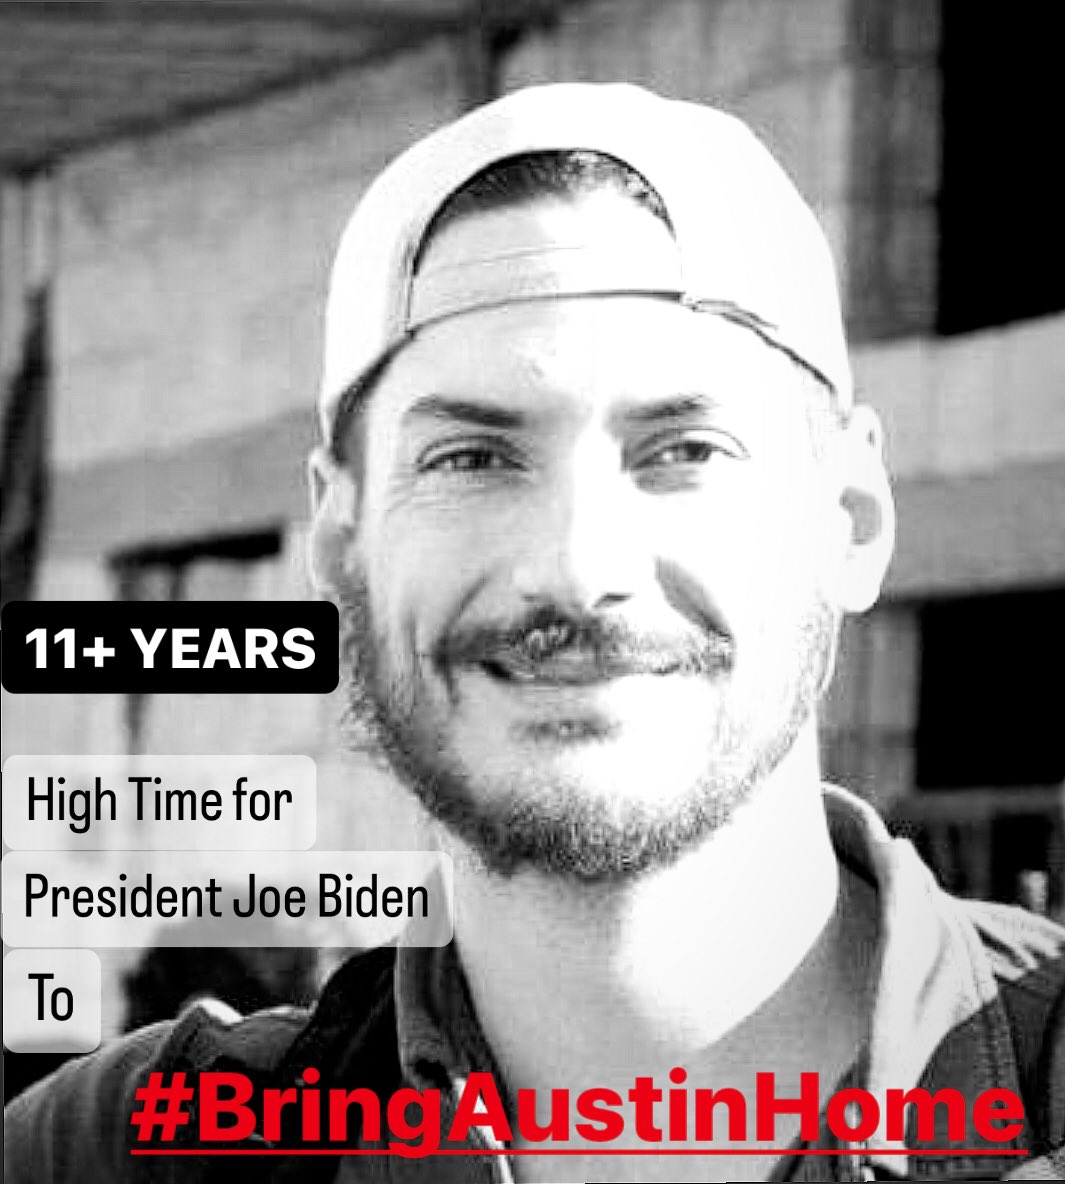 What are you waiting for Bring Austin Tice Home? Dr. Majd KamAlmaz died on the prison, he couldn't resist the worst conditions. Bring Austin Tice Home, wrongfully detained in Syria! @potus @SecBlinken @StateDept @USMC @DebraTice @JakeSullivan46